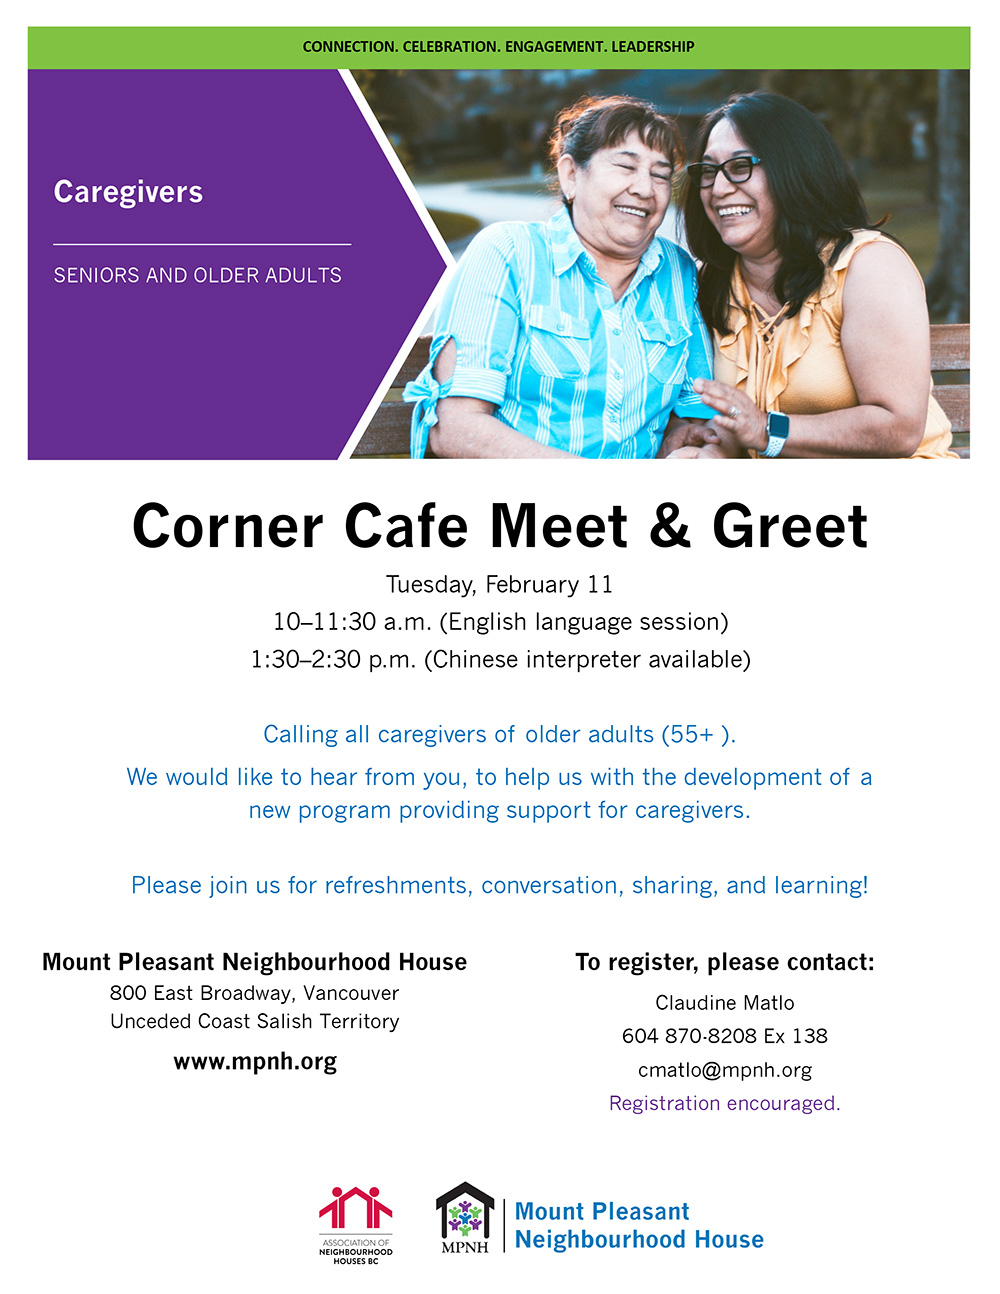 Poster for the Corner Cafe Meet & Greet showing two women smiling together